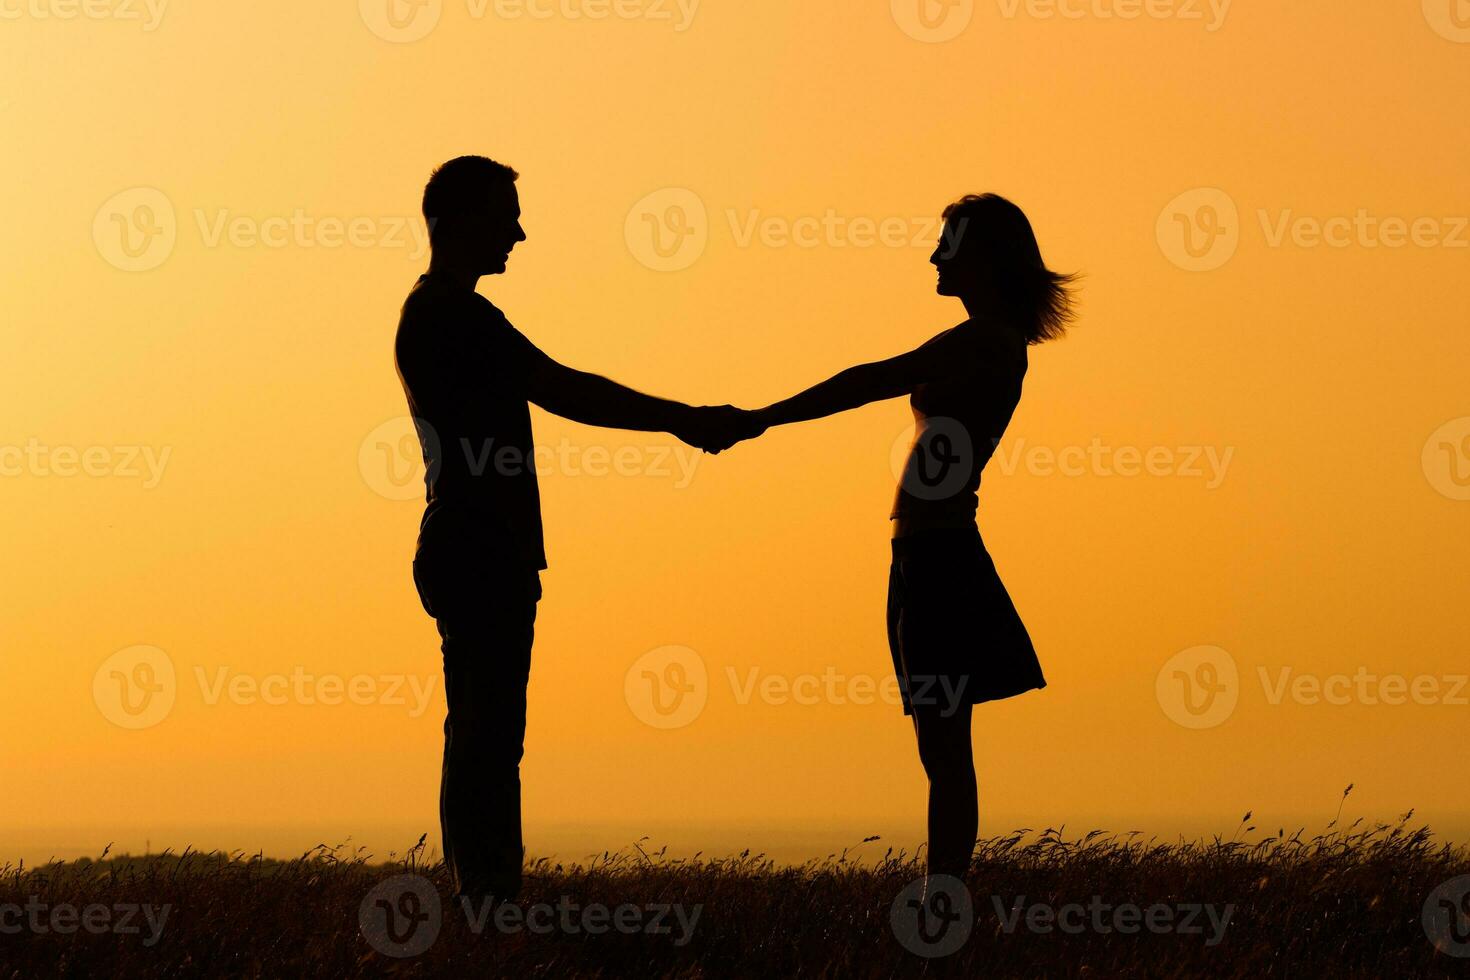 Silhouette of a man and a woman holding hands photo